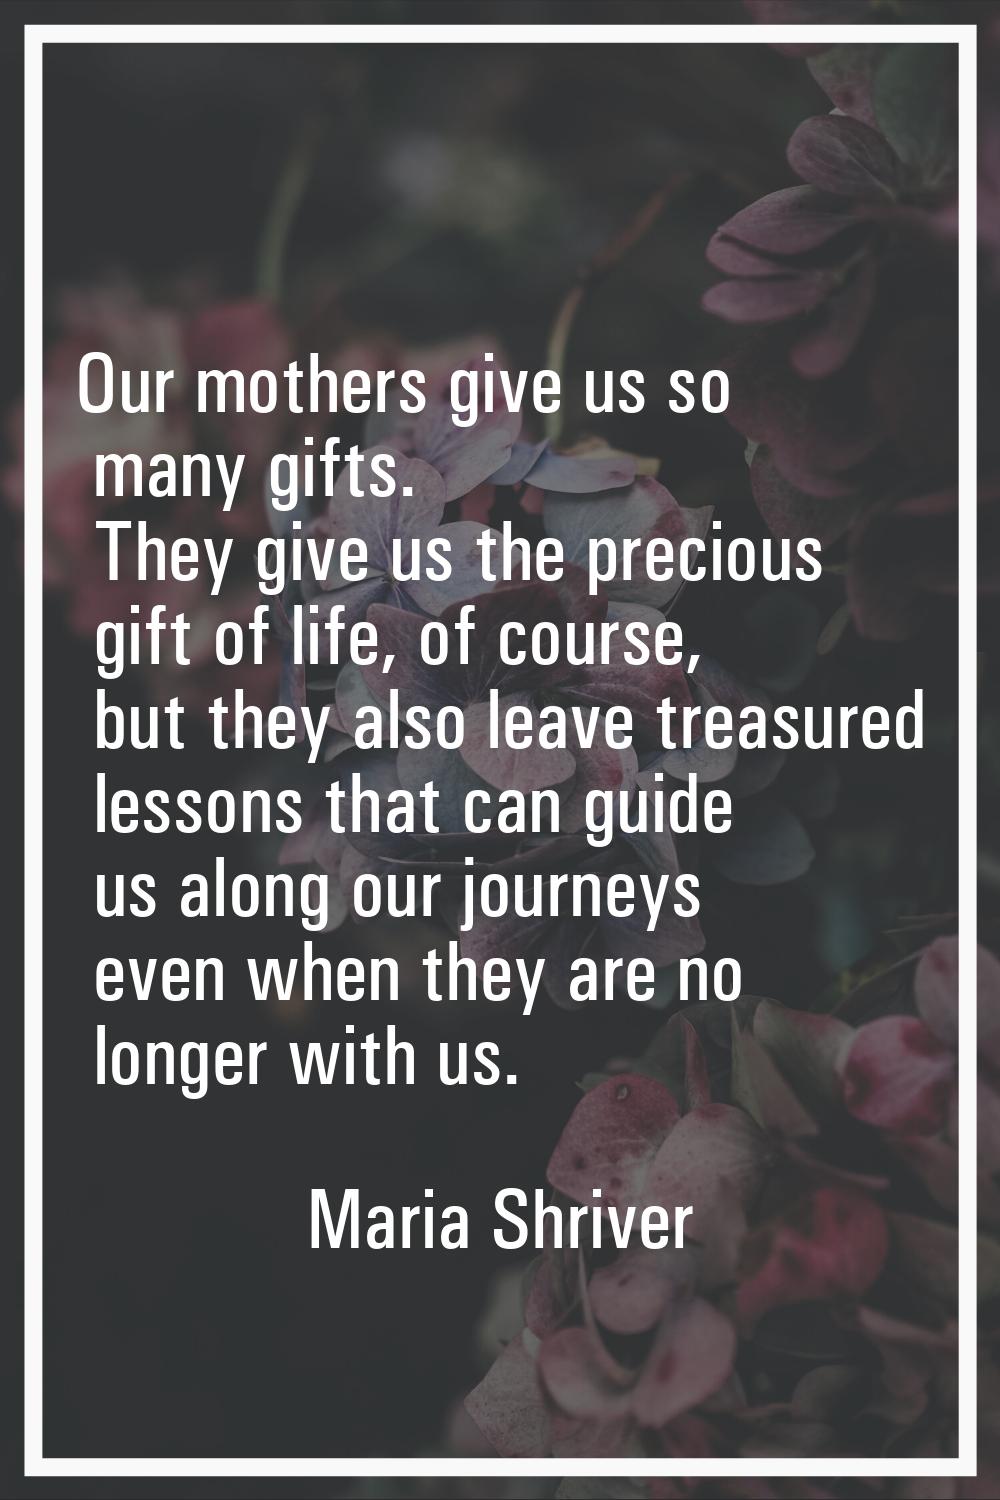 Our mothers give us so many gifts. They give us the precious gift of life, of course, but they also